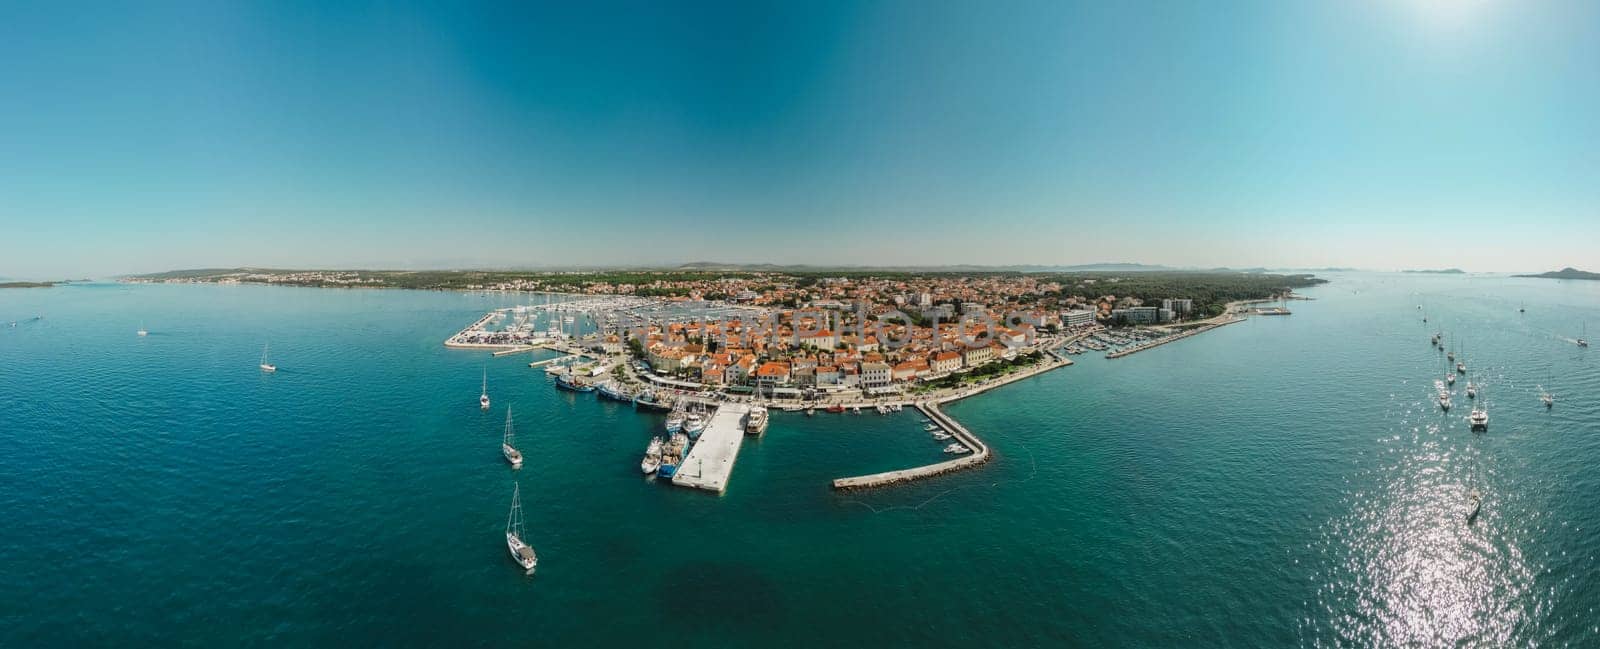 Biograd na Moru, aerial panoramic view of marina and beautiful Old Town architecture by Popov